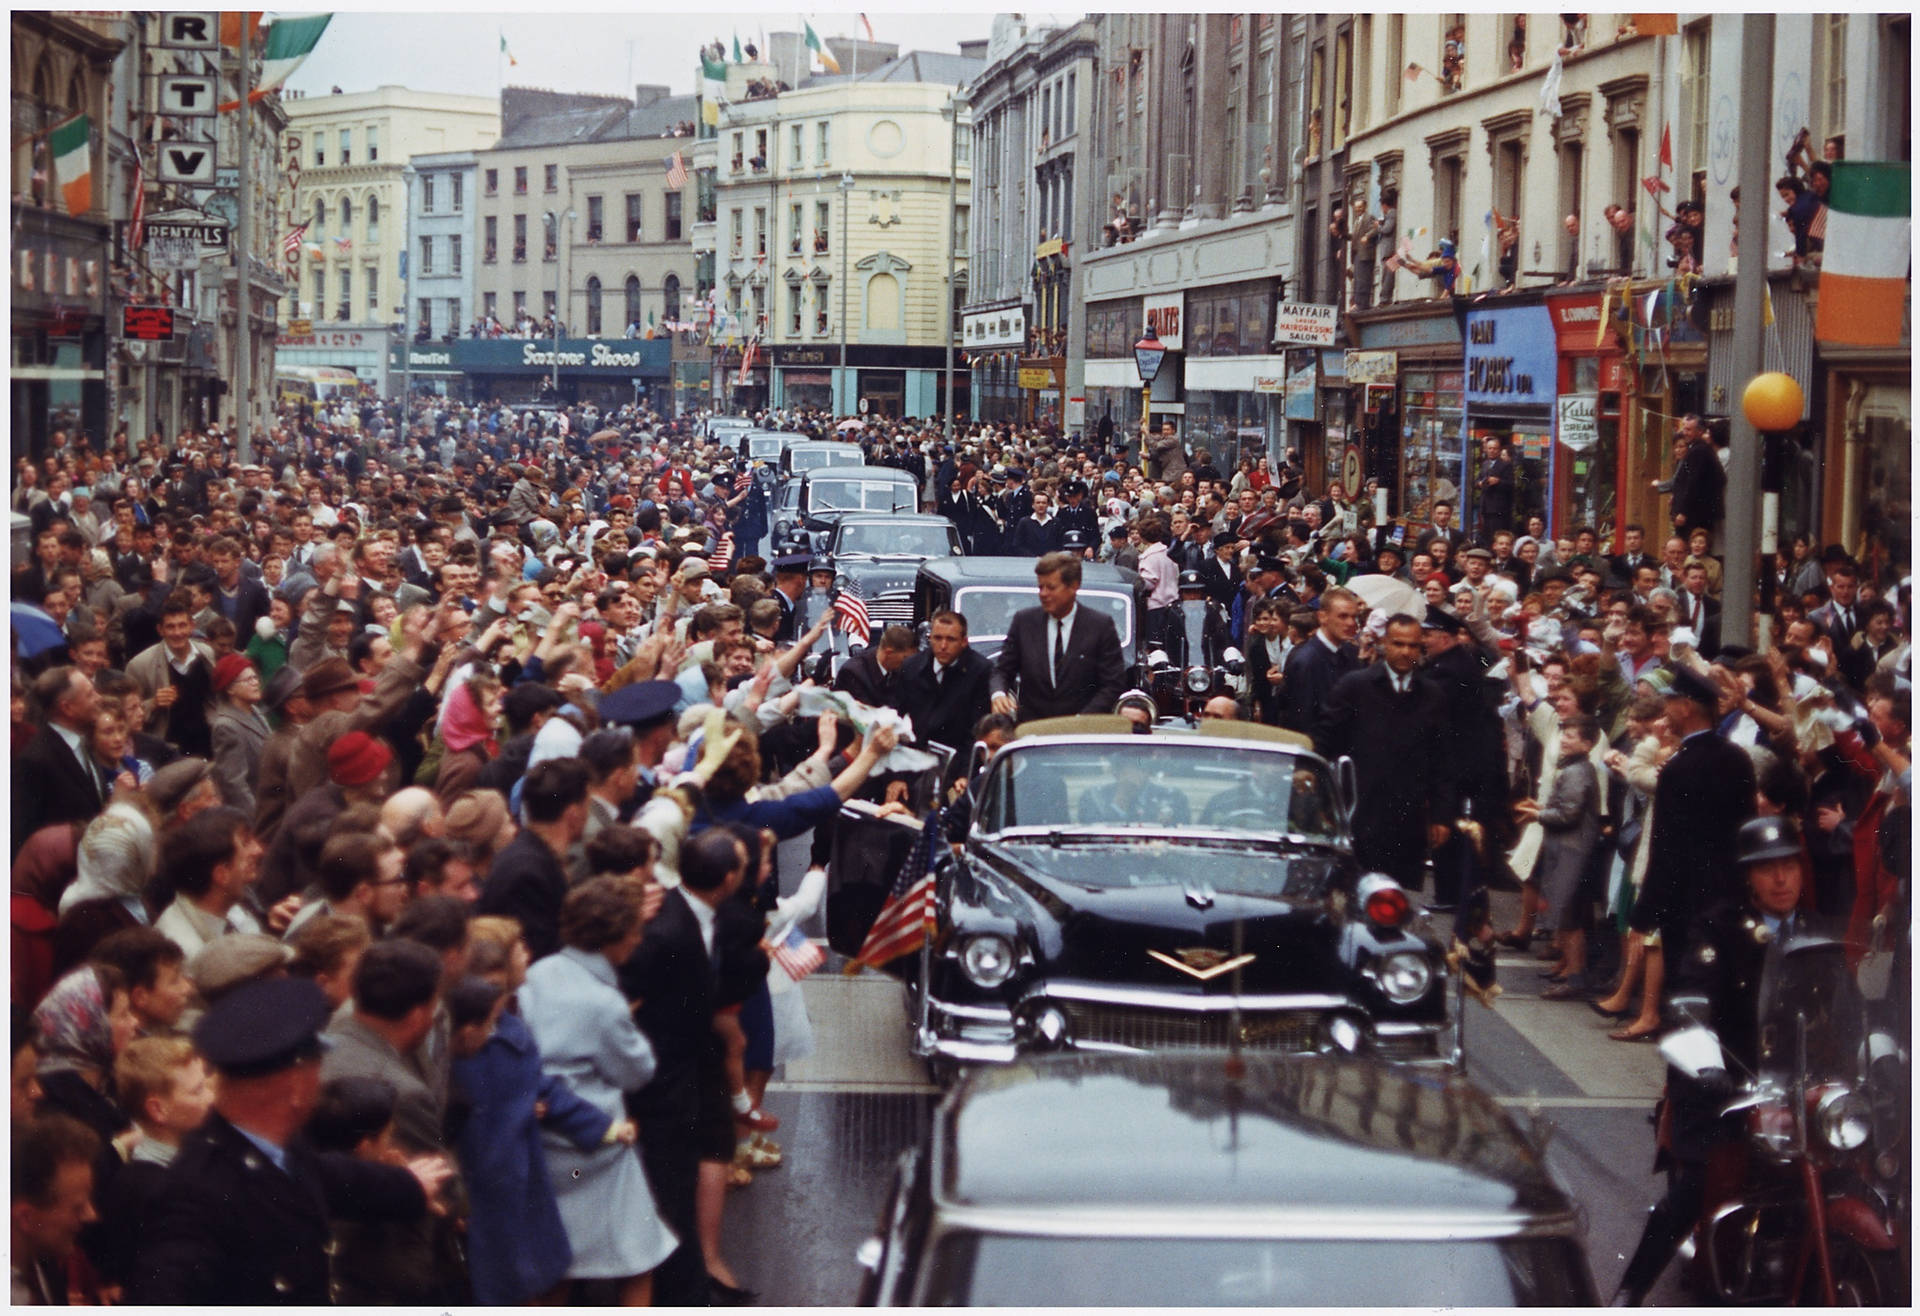 American Crowd And John F. Kennedy Background